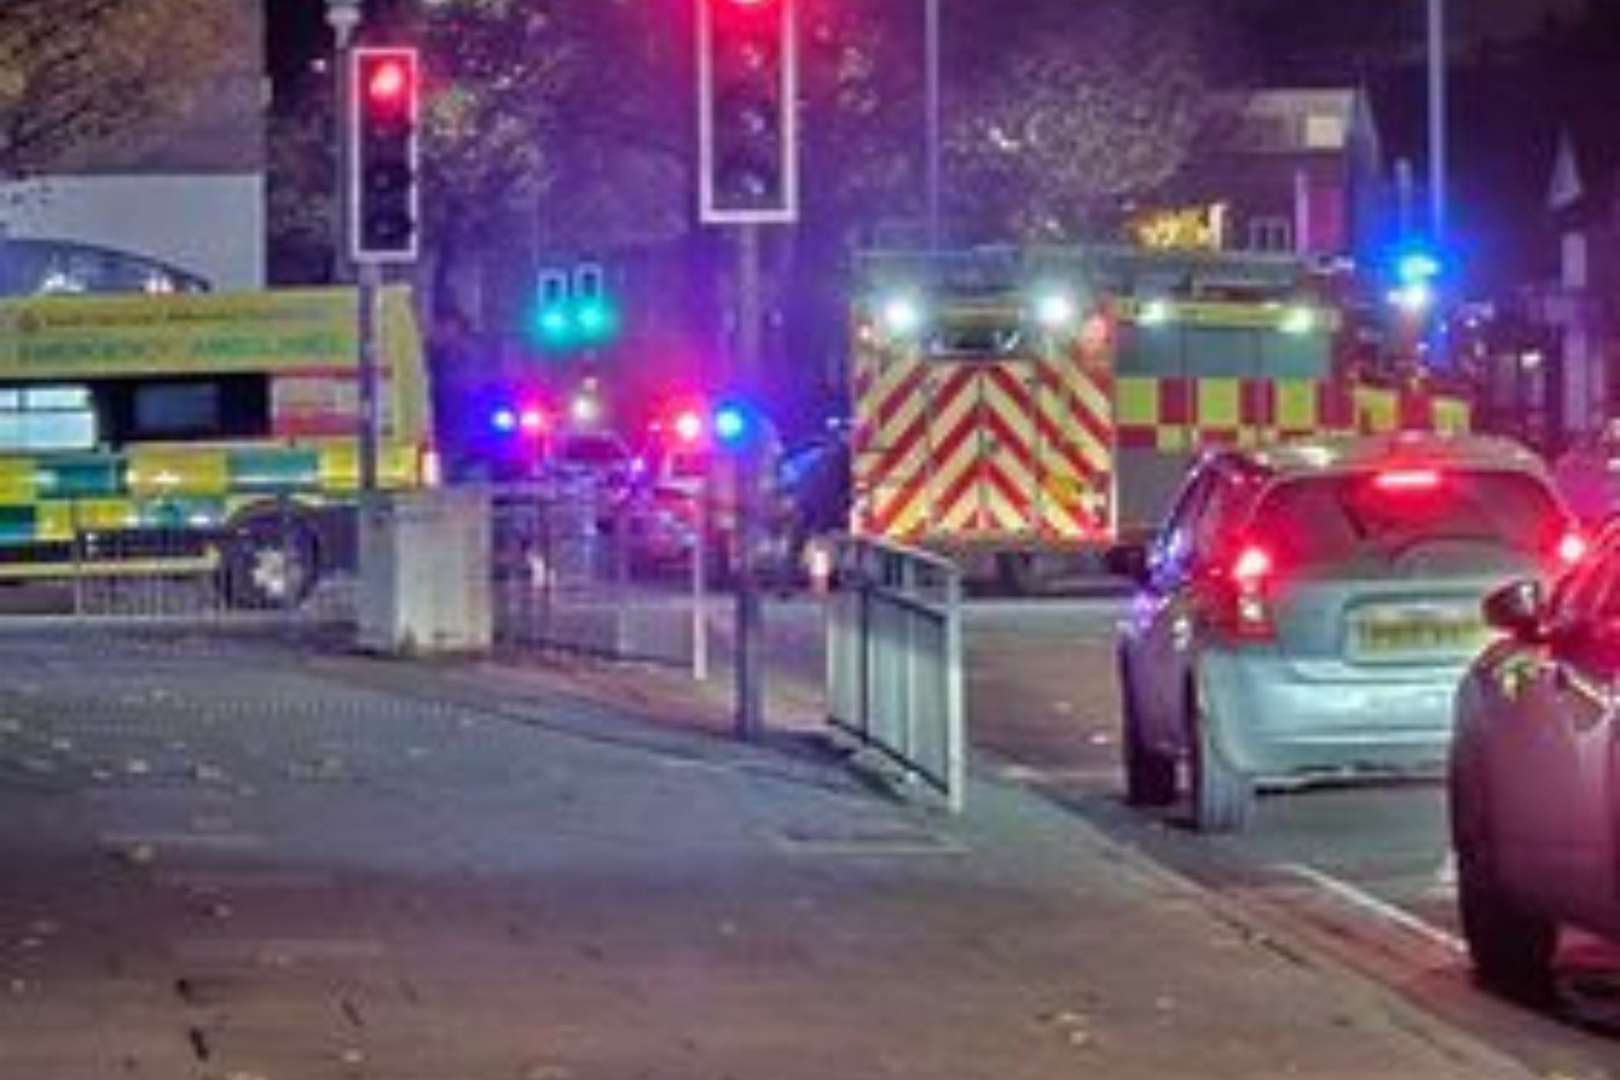 Emergency services were called to St George's Place, Canterbury, after a man suffered a medical incident. Picture: Radoslav Stoyanov